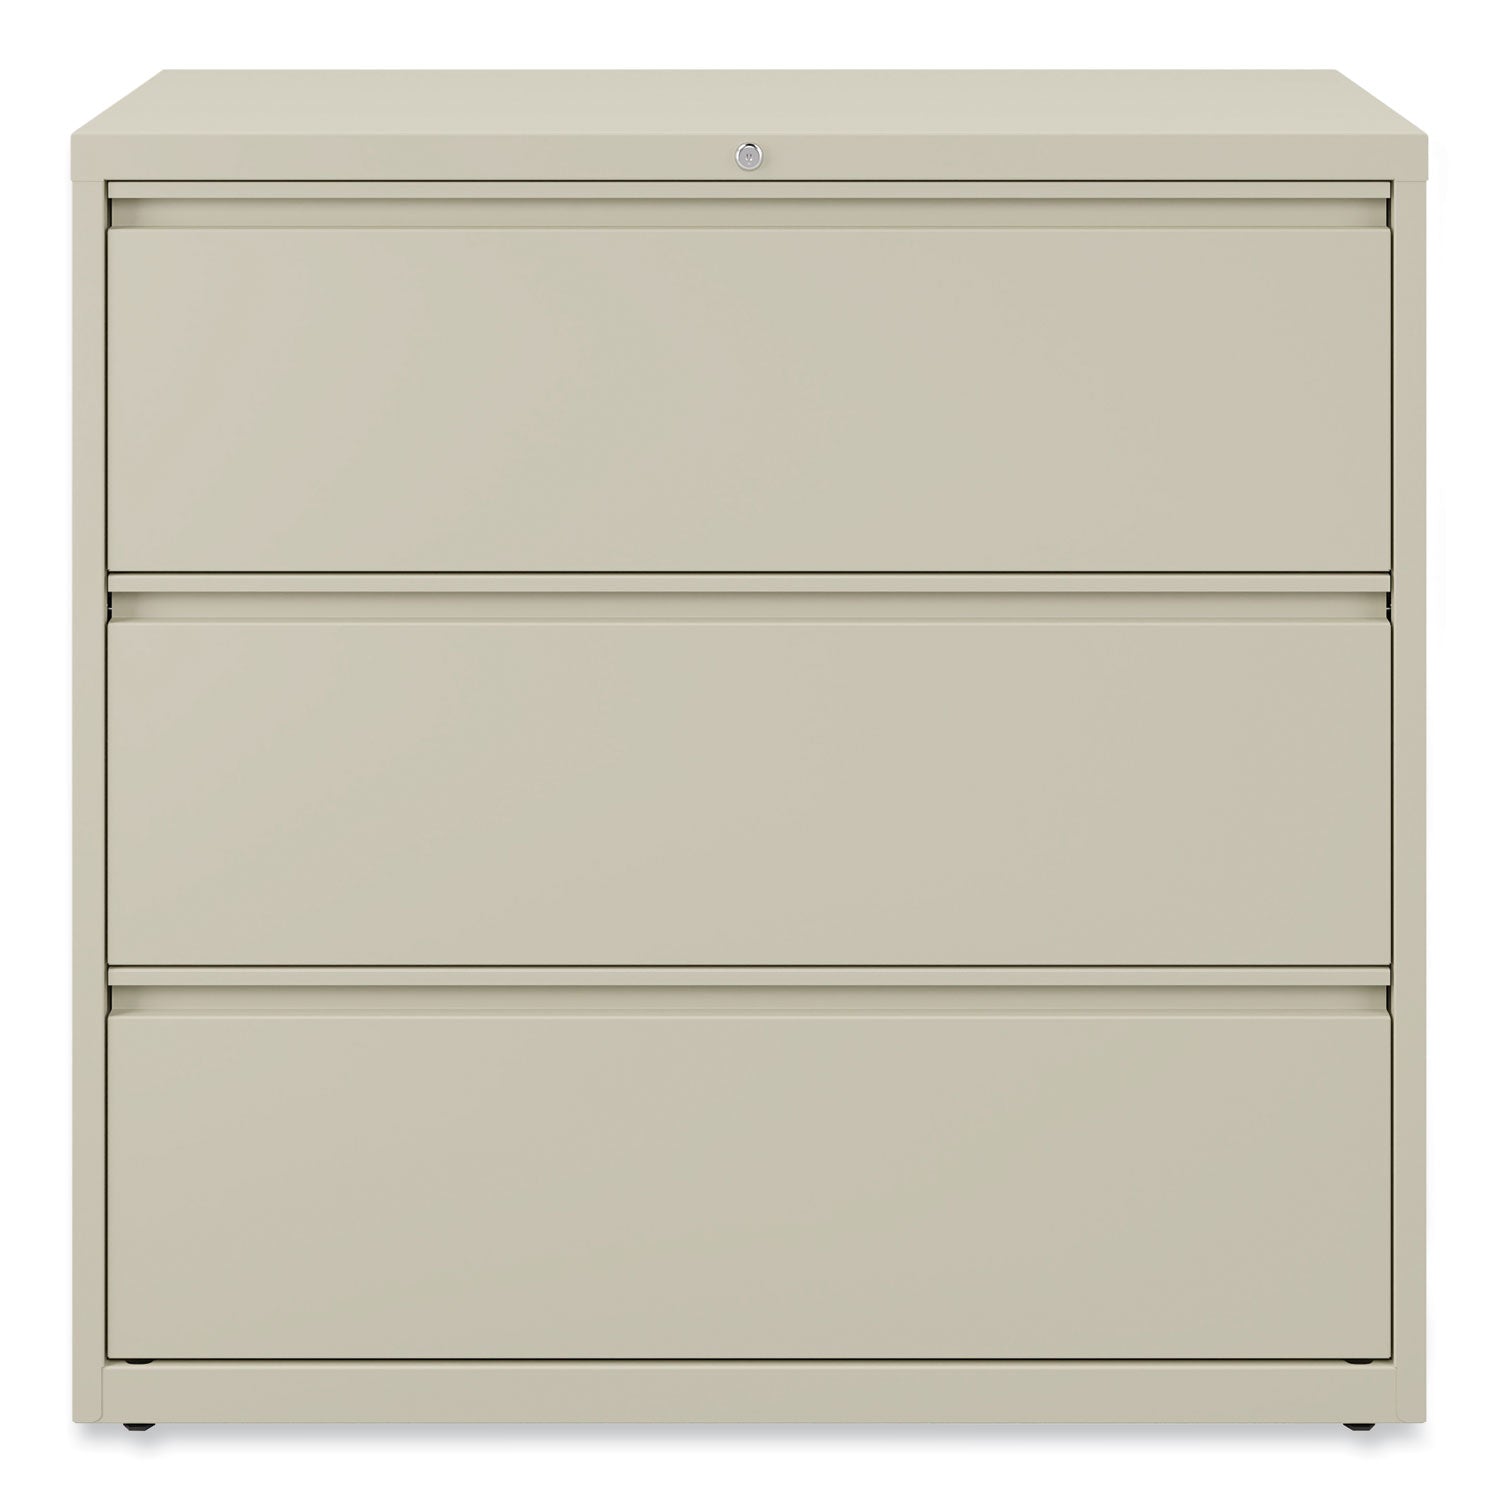 lateral-file-3-legal-letter-a4-a5-size-file-drawers-putty-42-x-1863-x-4025_alehlf4241py - 8